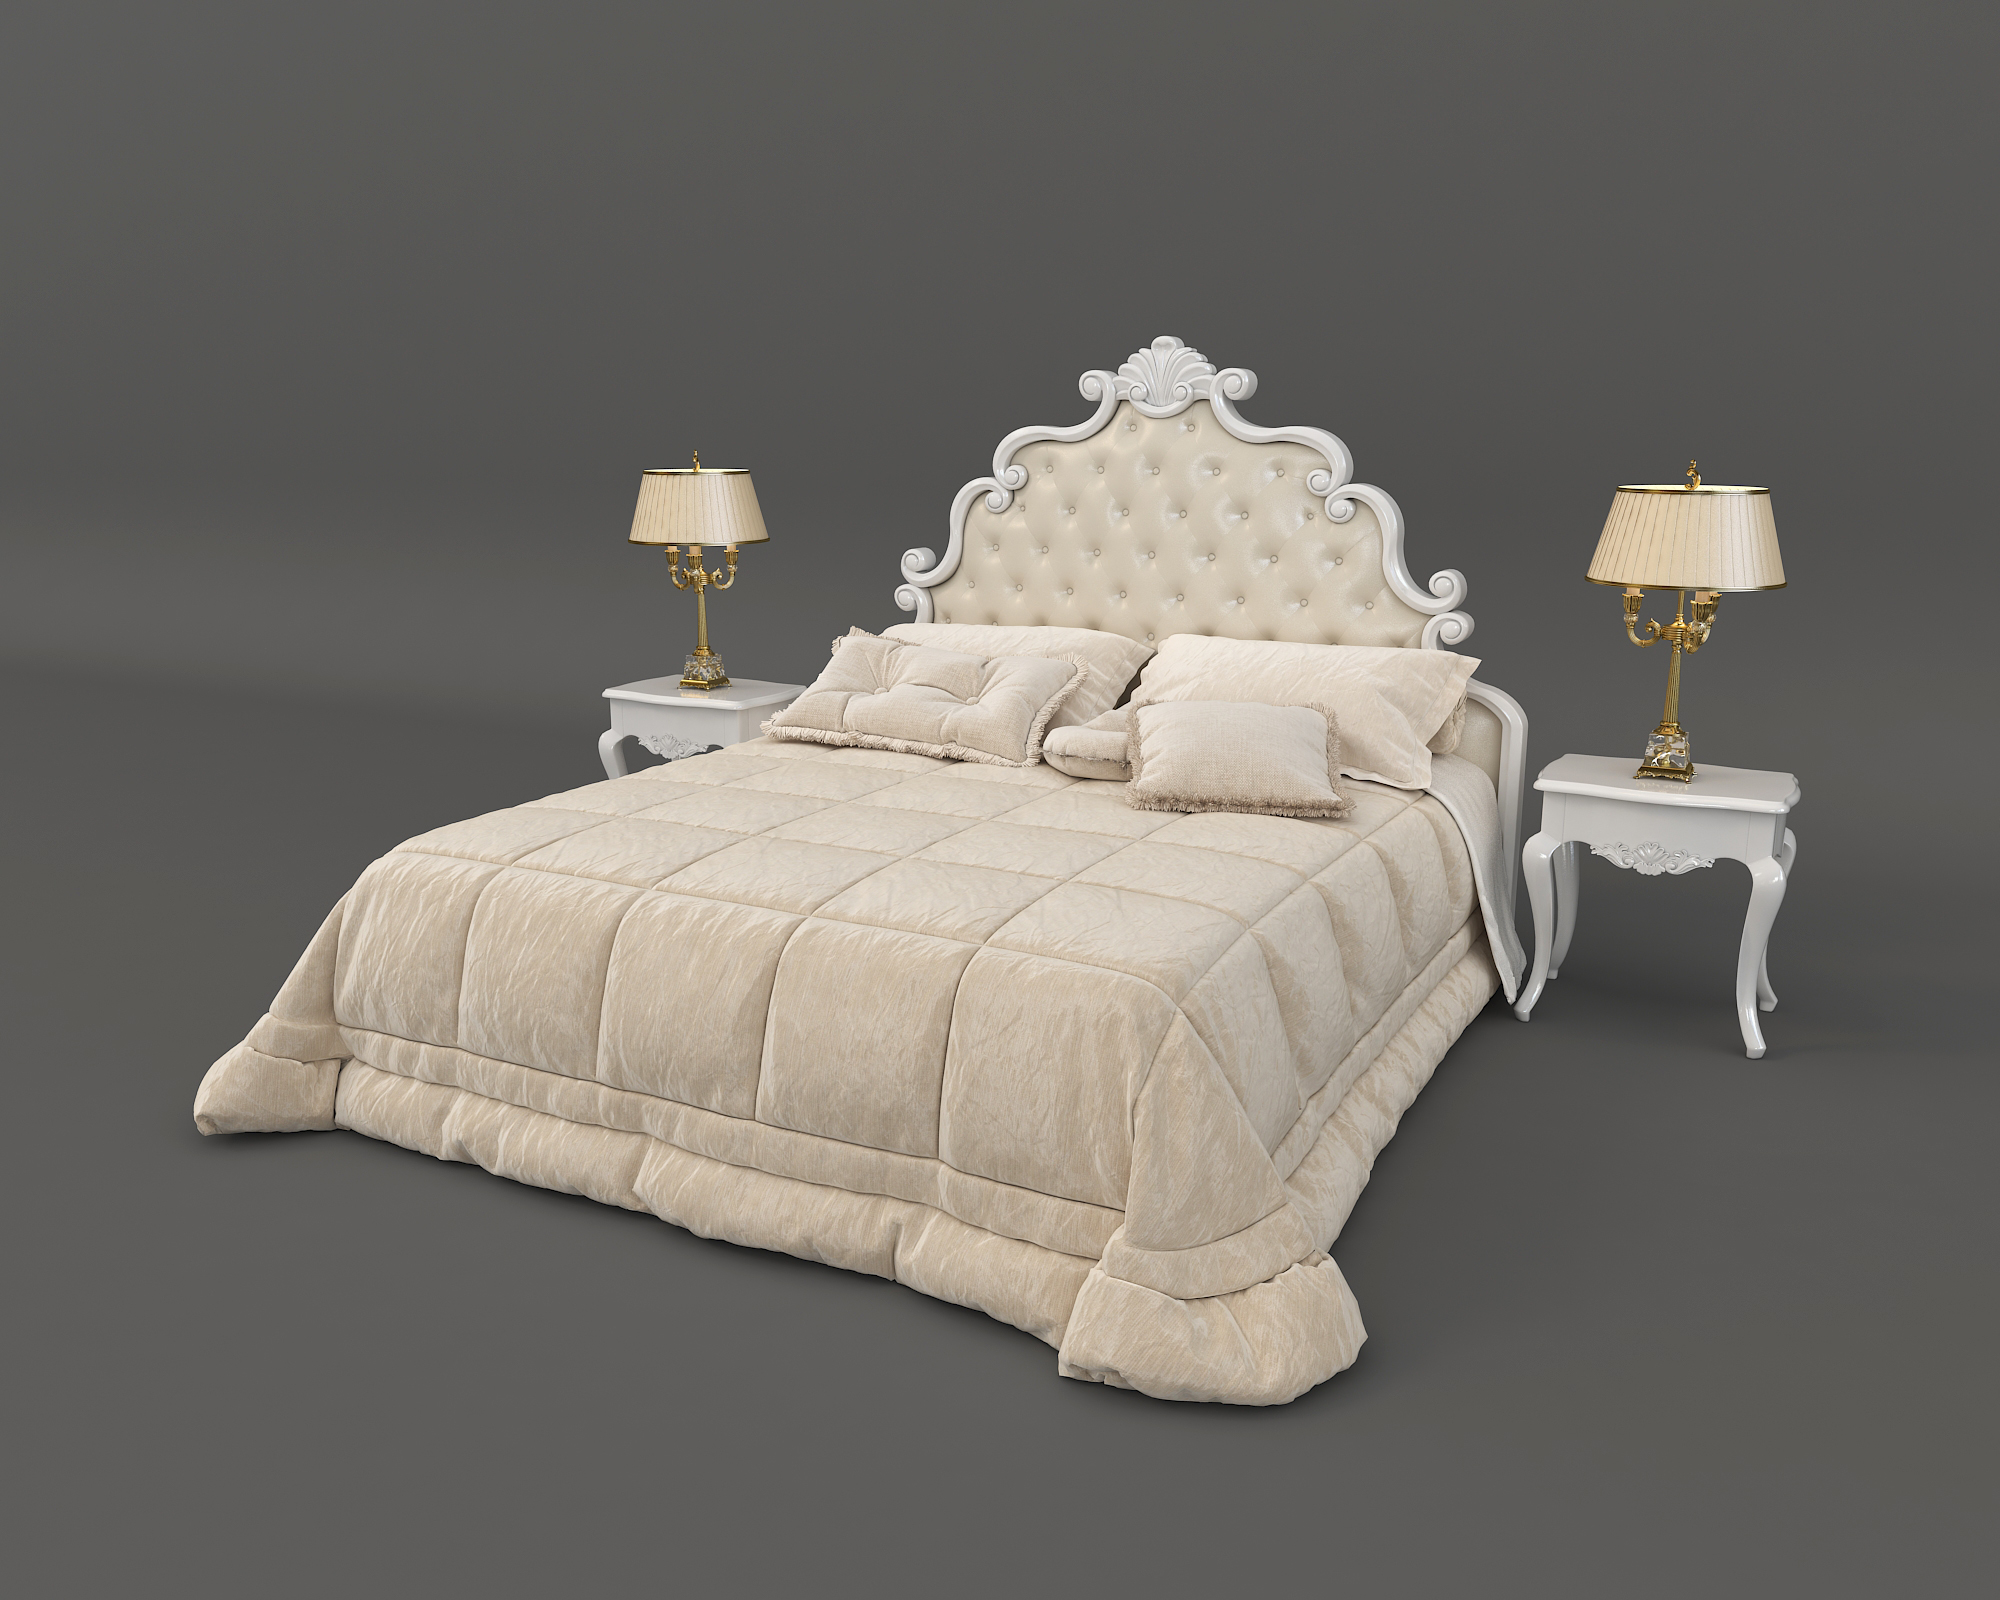 European Style Bed 9 By Nhattuankts, European Style Bed Frame